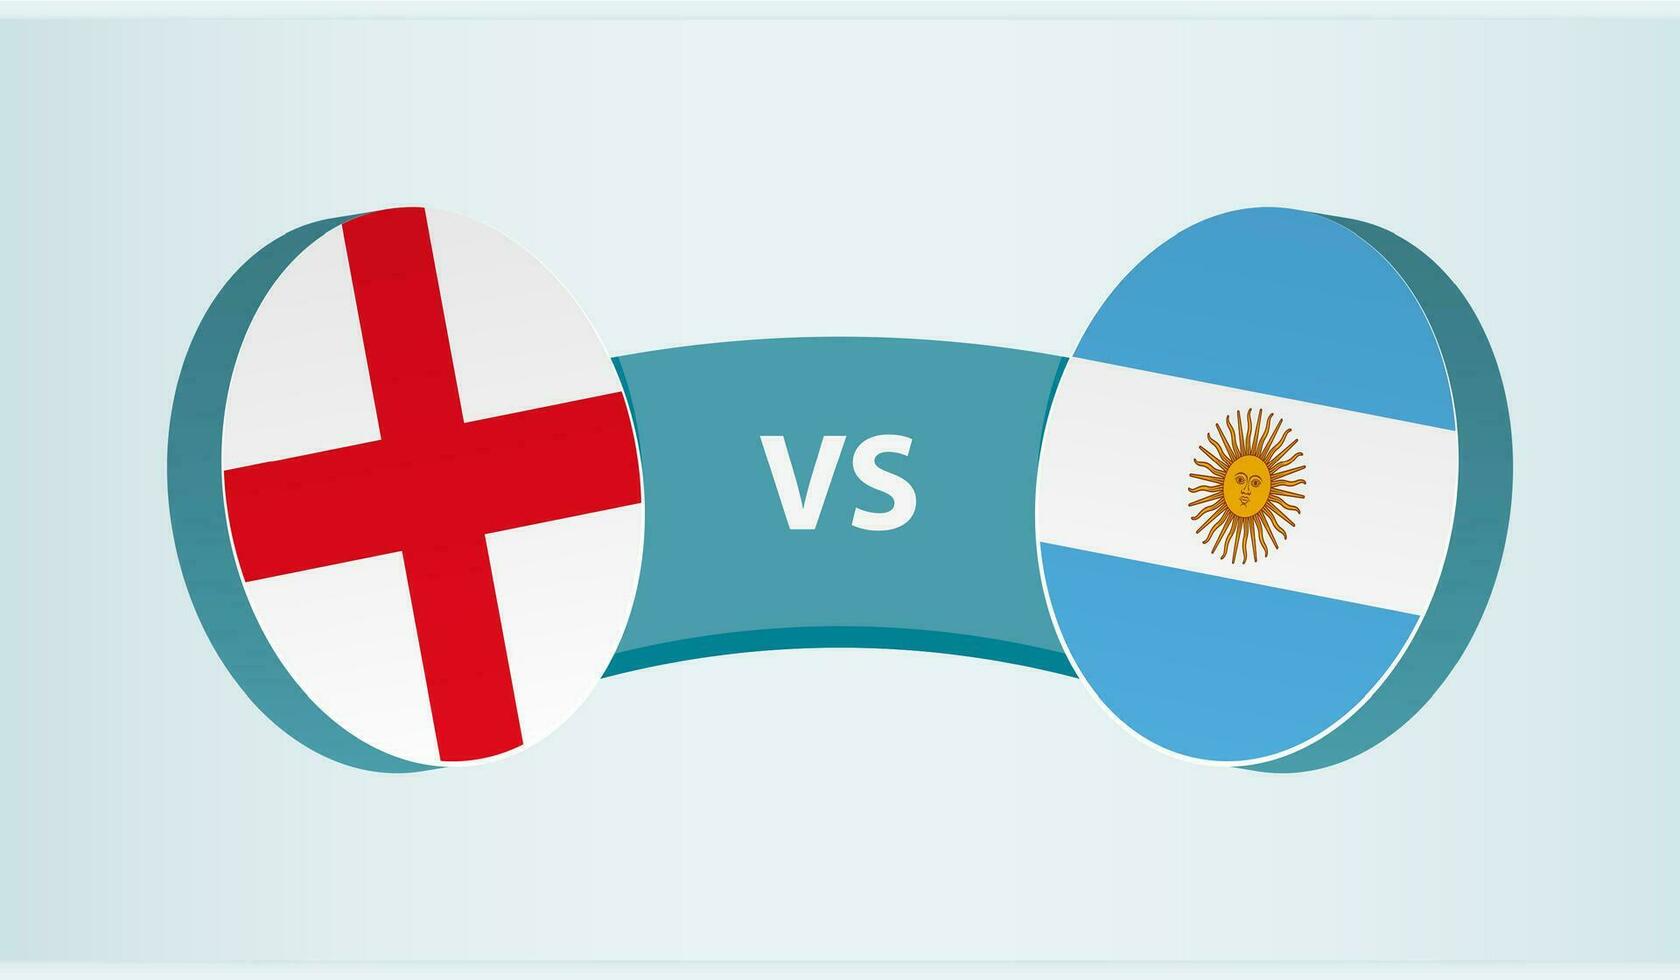 England versus Argentina, team sports competition concept. vector